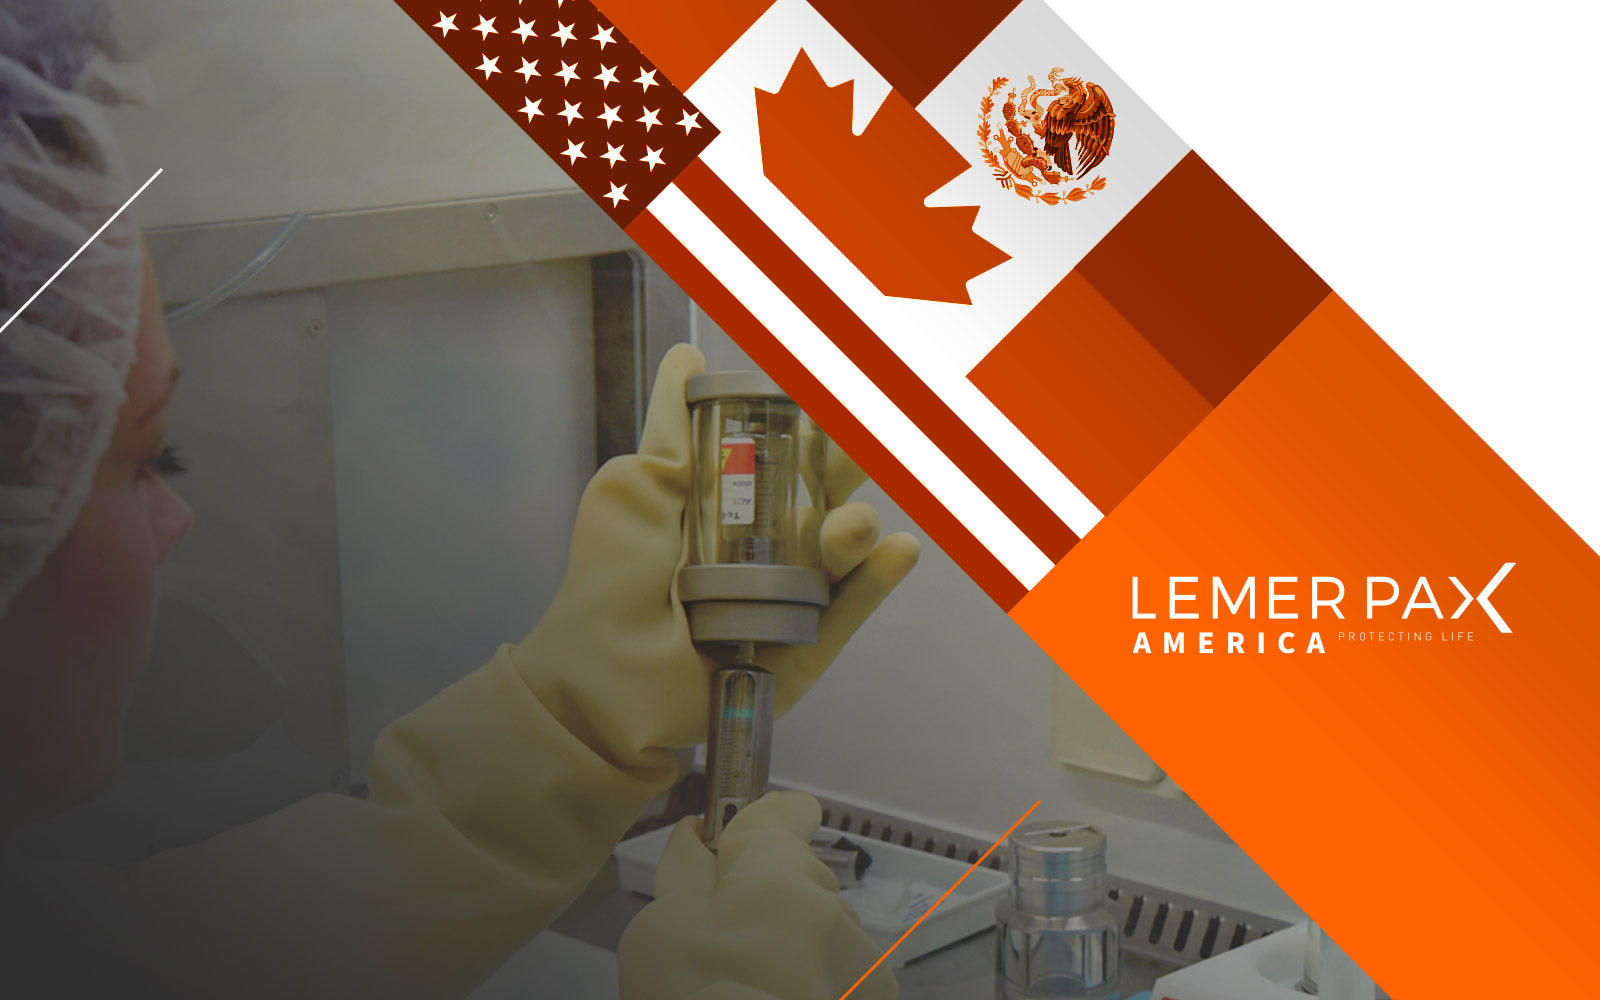 Lemer Pax and CCNuclear announce the creation of Lemer Pax America